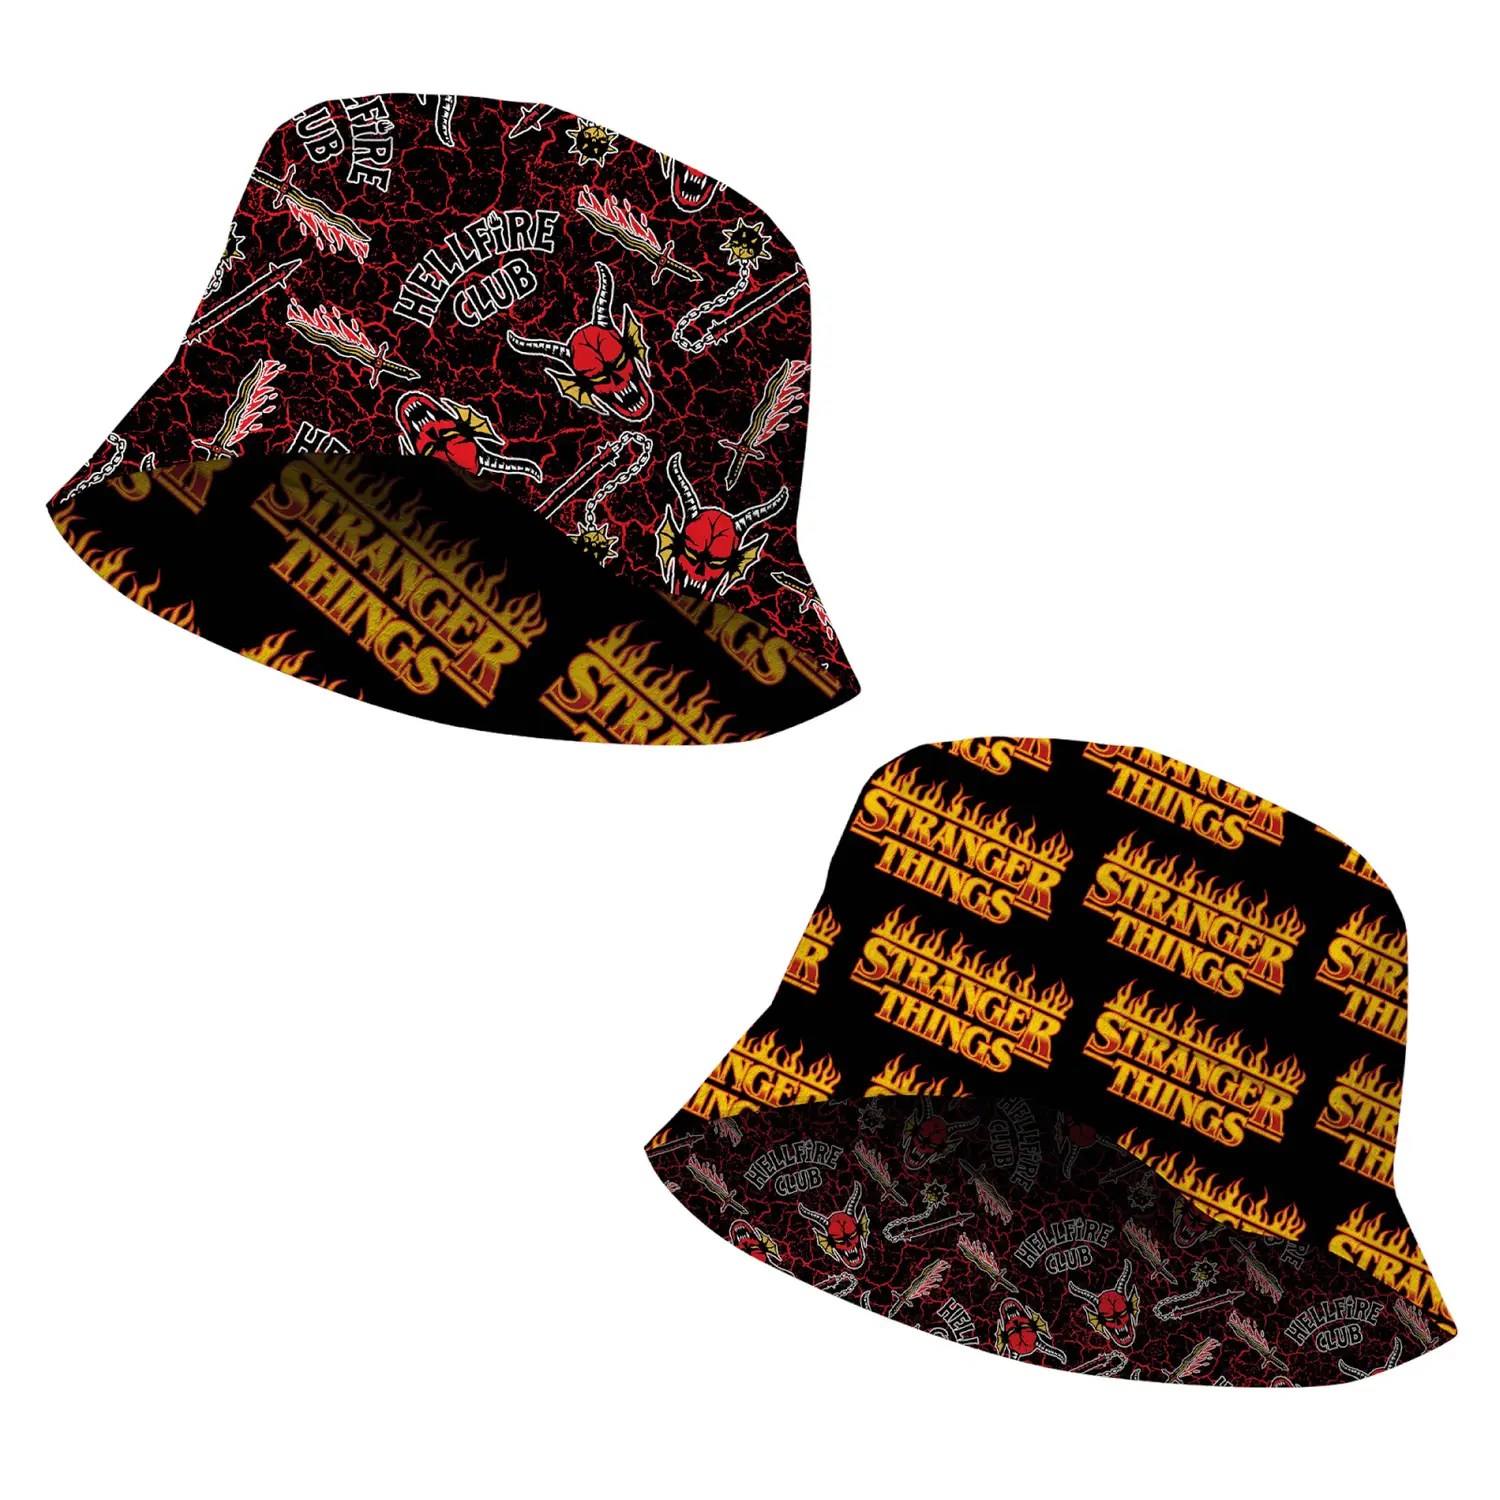 A Stranger Things bucket hat.